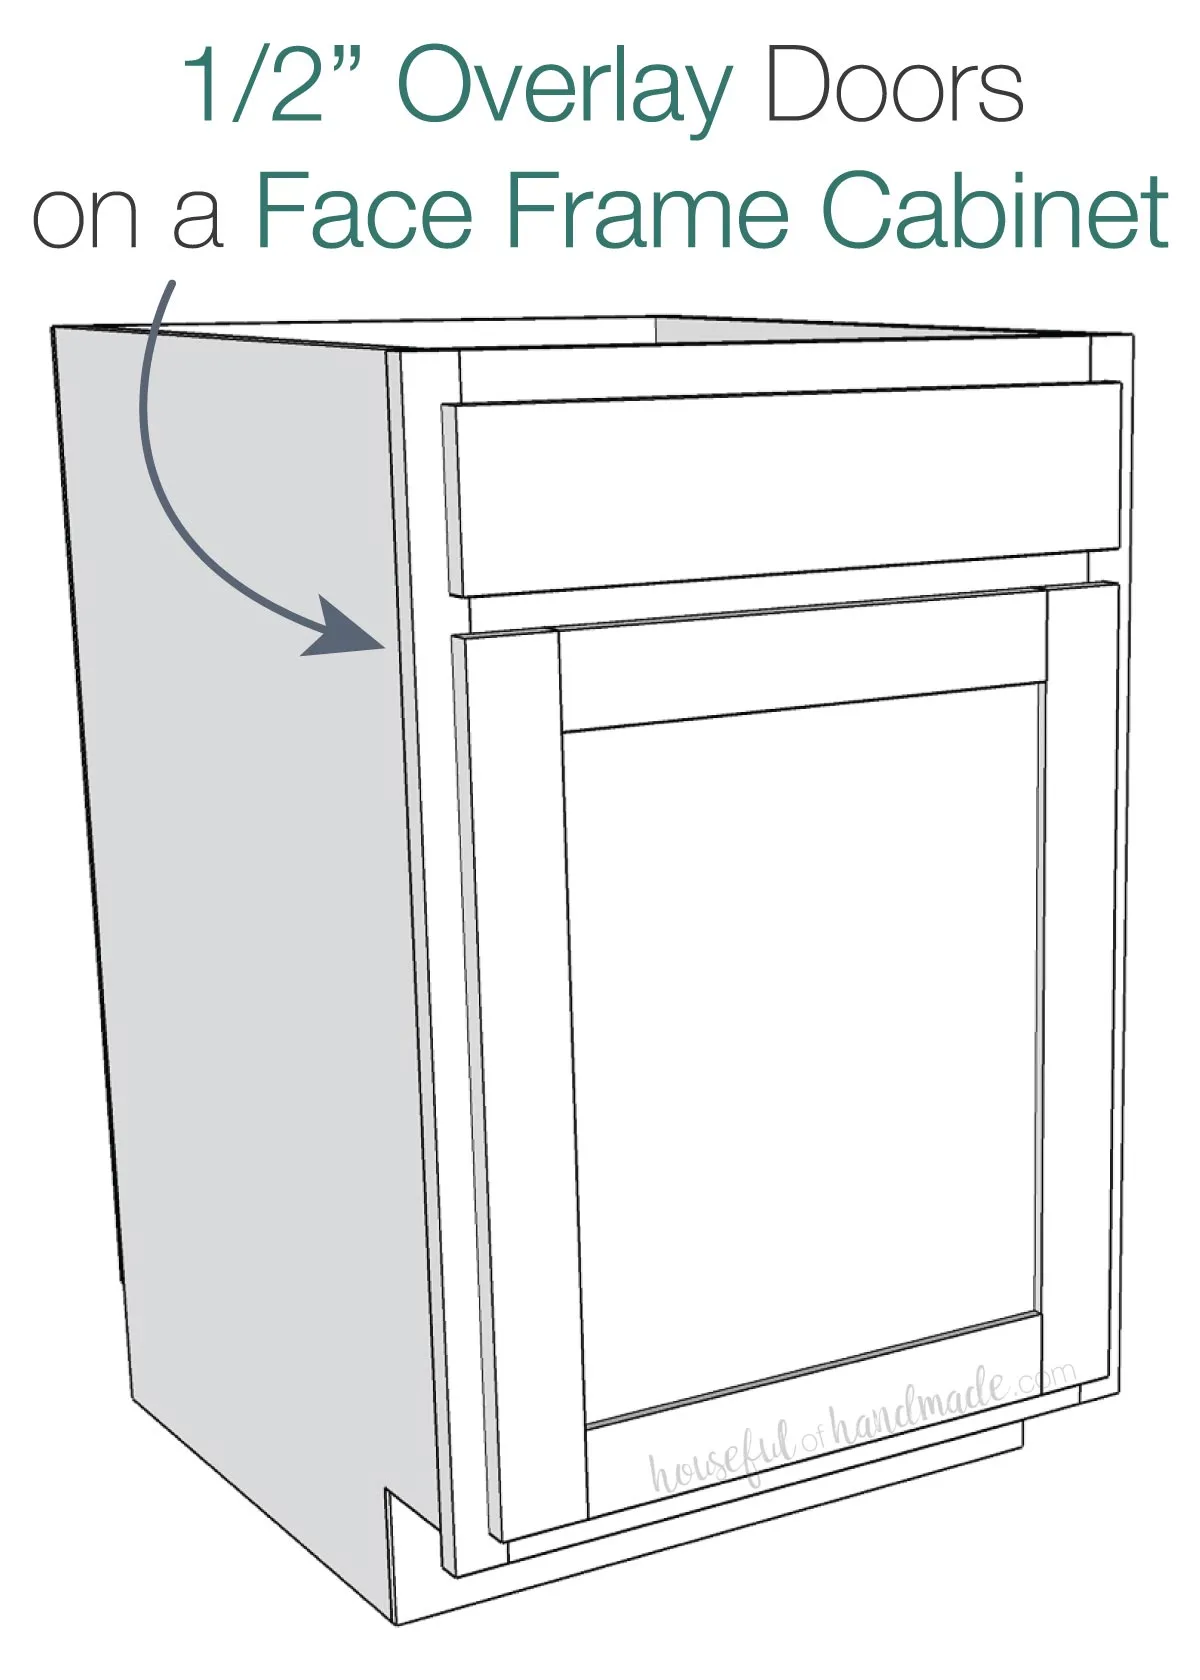 3D sketch of cabinet with 1/2" overlay doors on it.